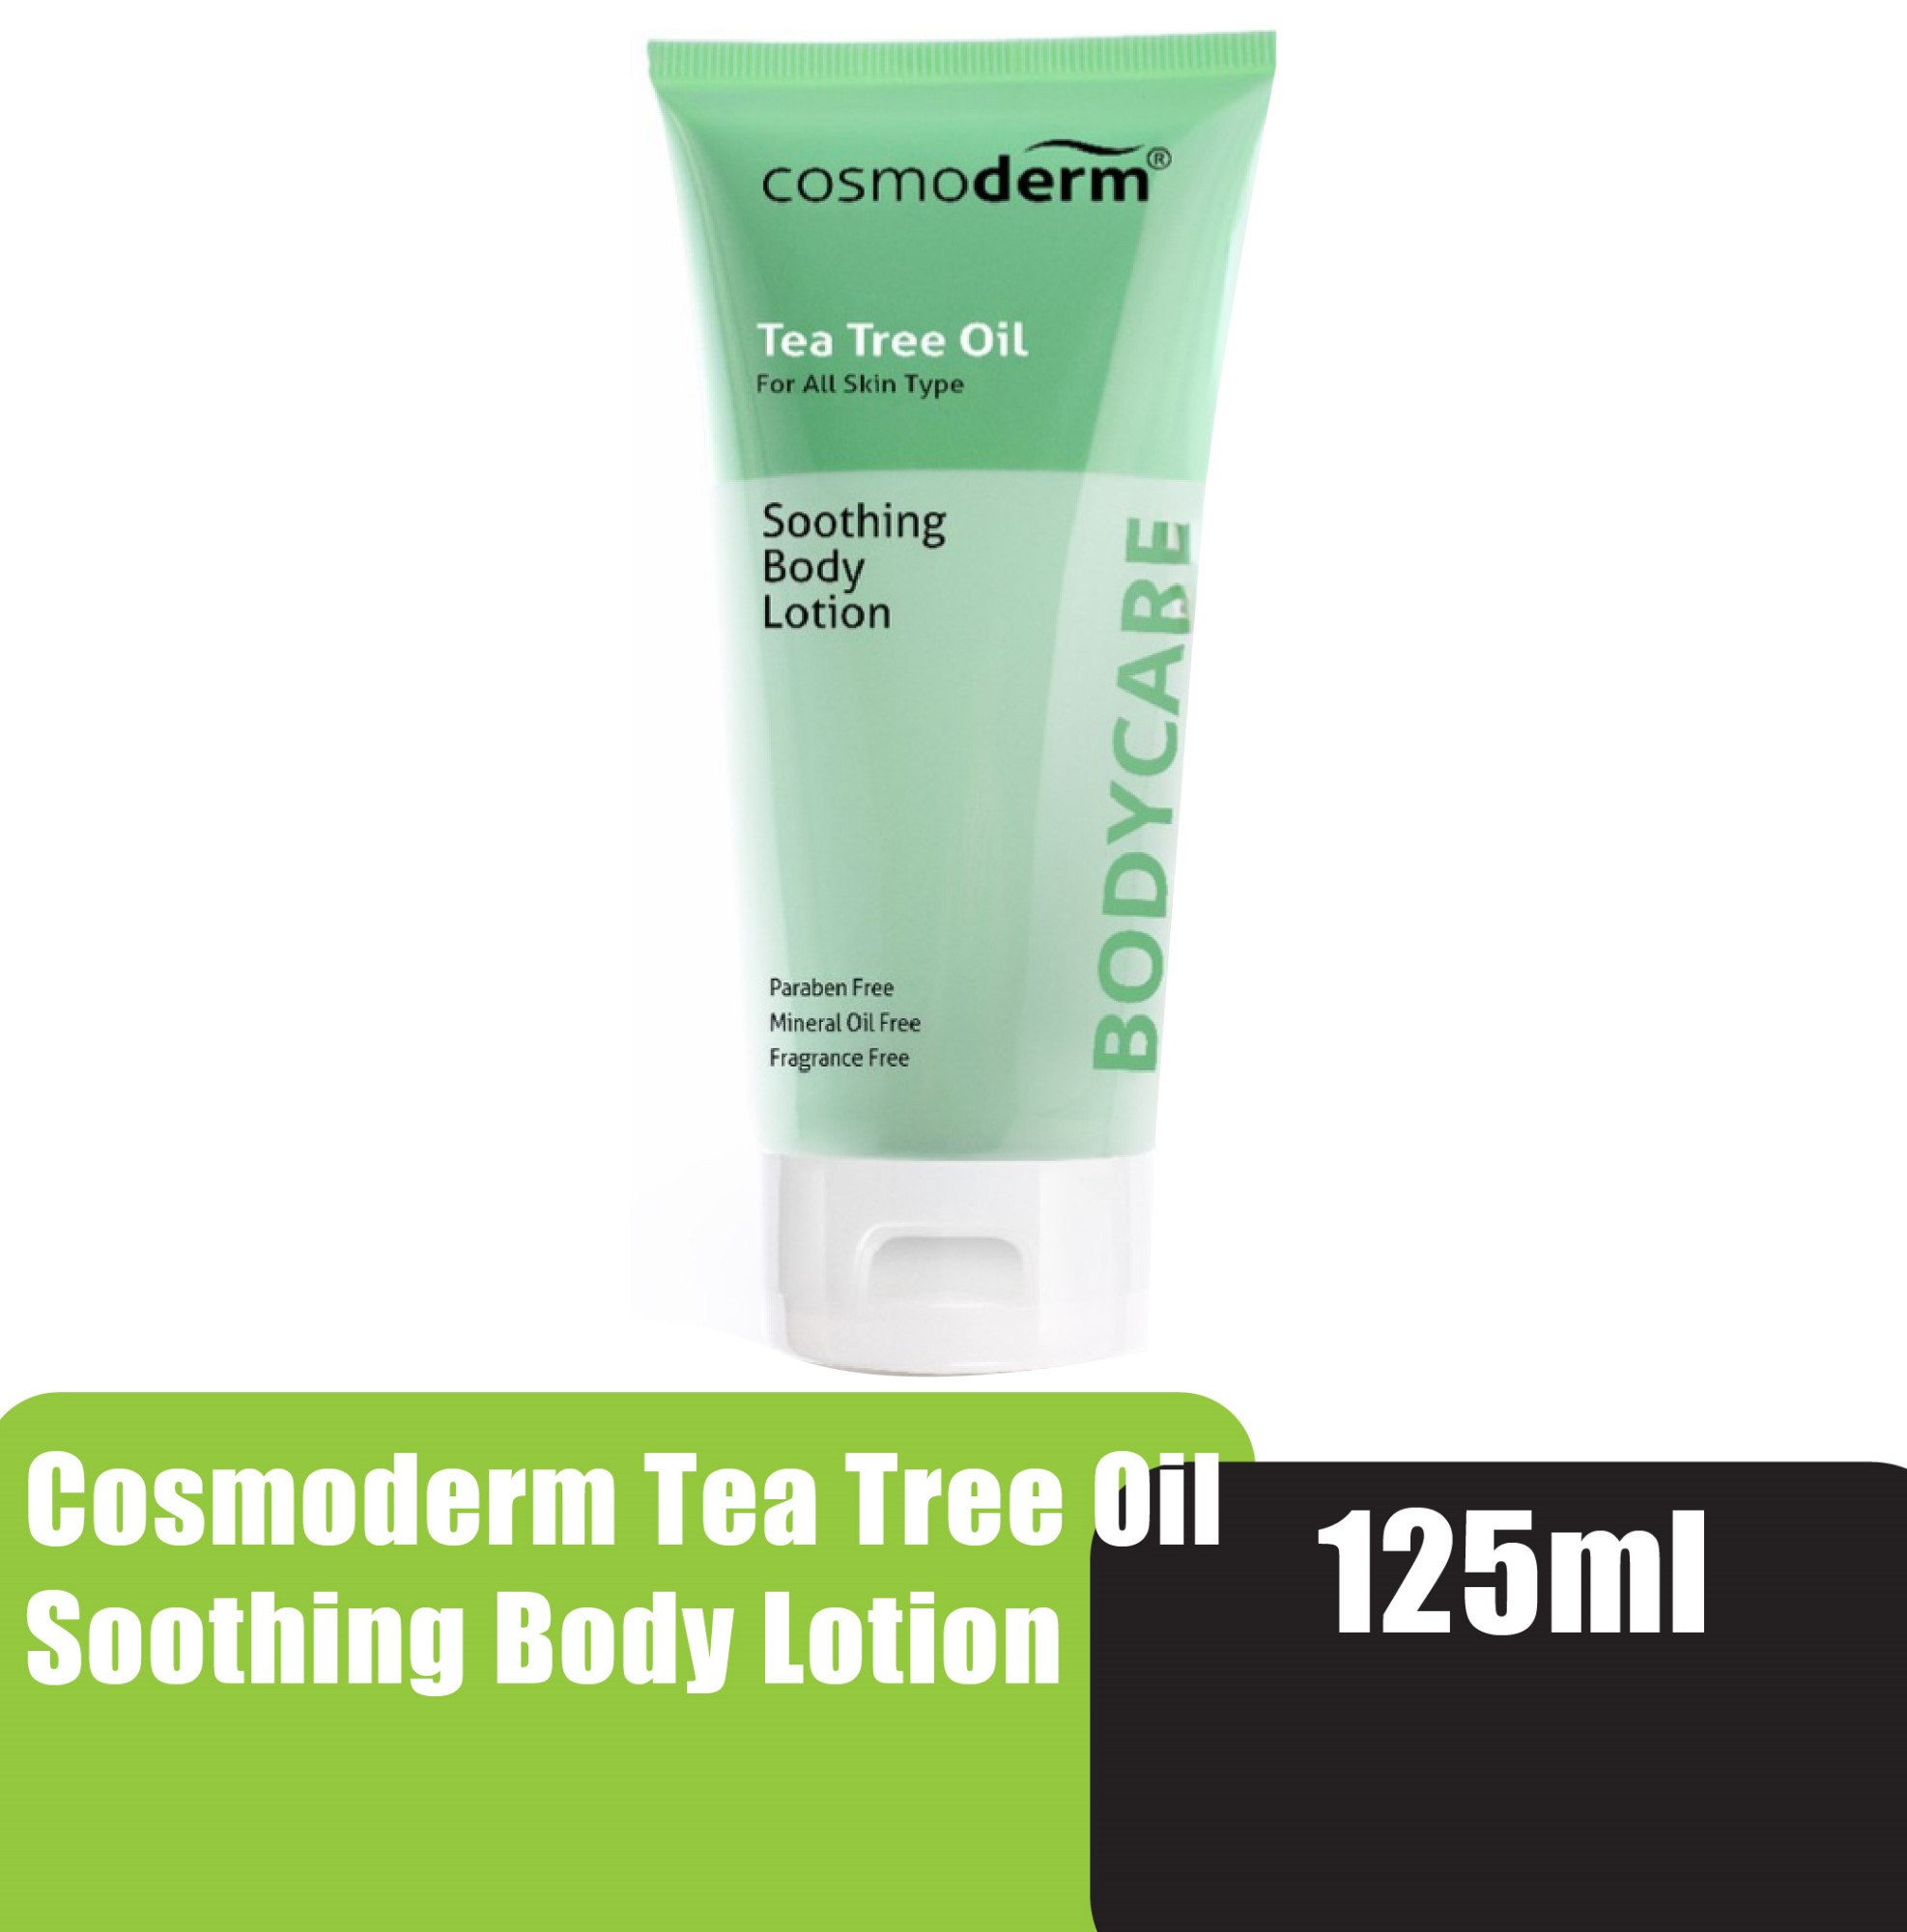 Cosmoderm Tea Tree Oil Soothing Body Lotion 125ml